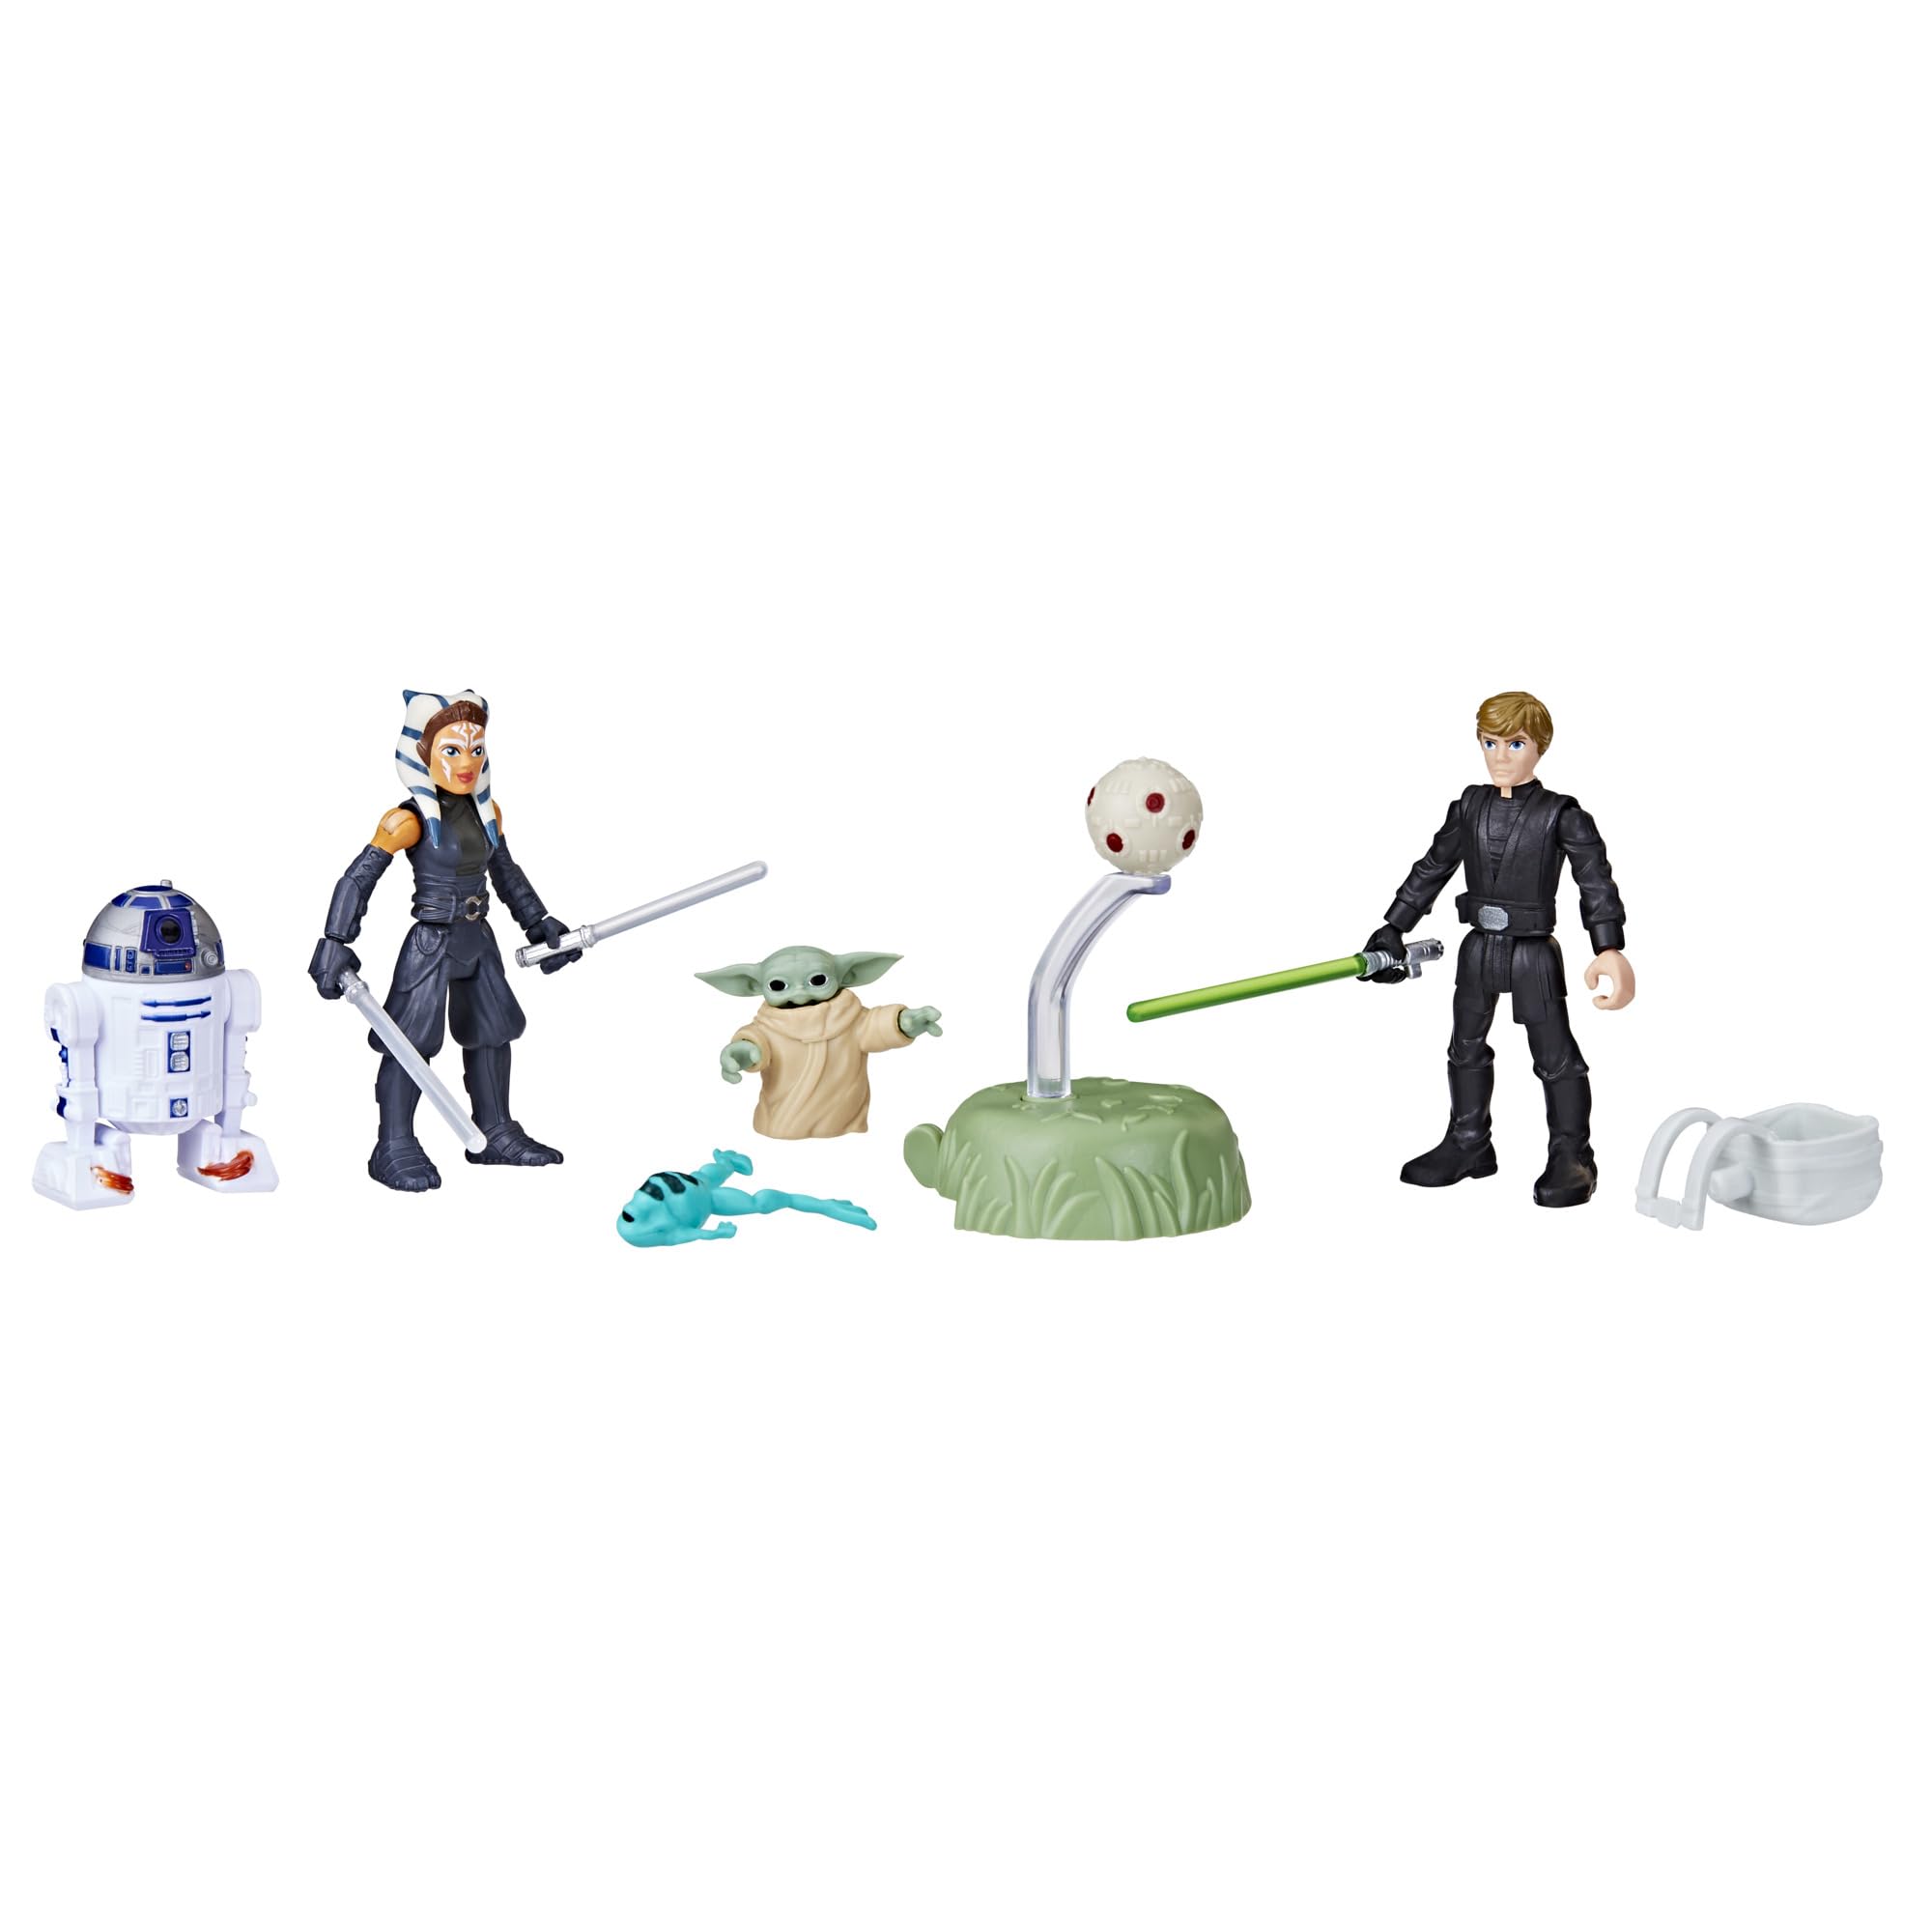 Prime Members: 4-Pack Star Wars 2.5" Mission Fleet Action Figure Set w/ Accessories $9.49 + Free Shipping